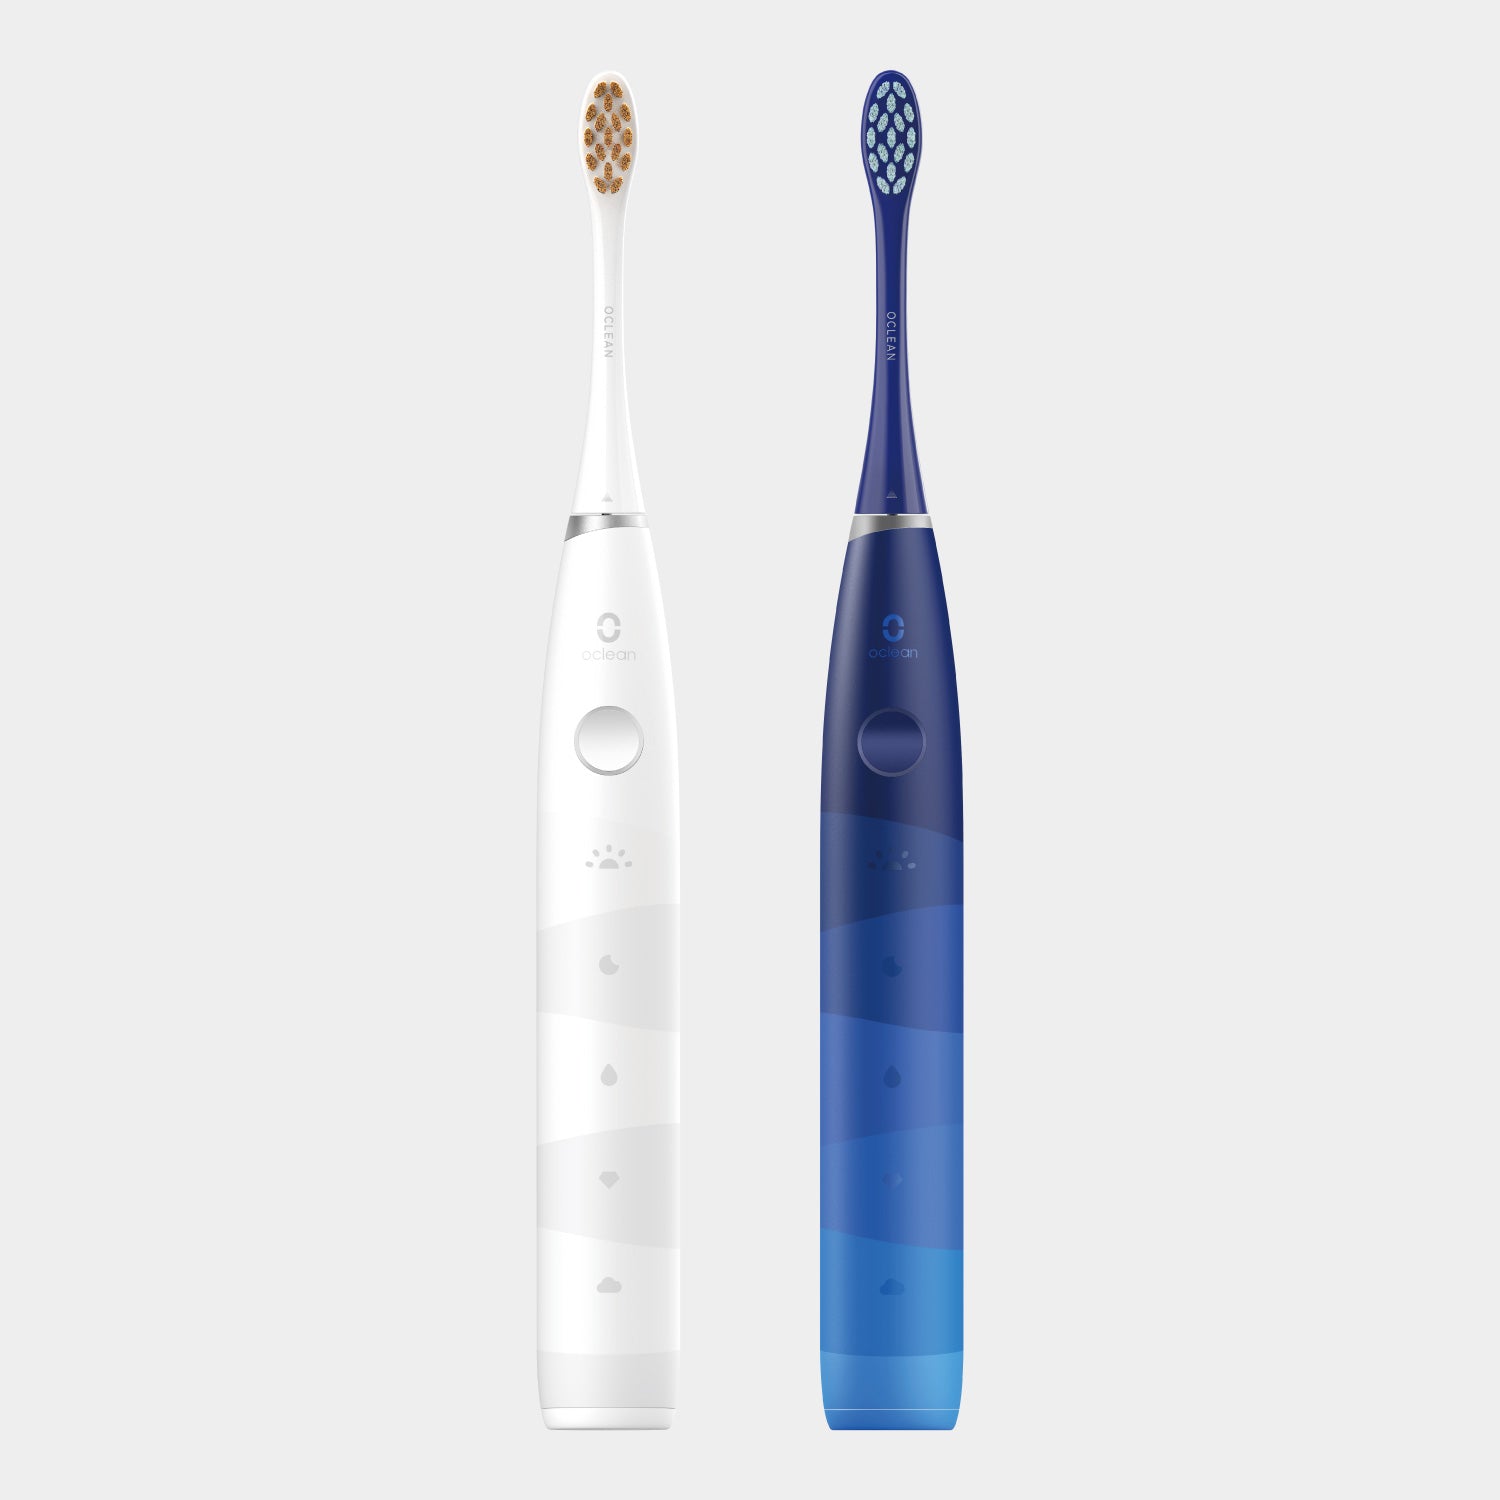 Oclean Flow Electric Toothbrush-Toothbrushes-Oclean US Store